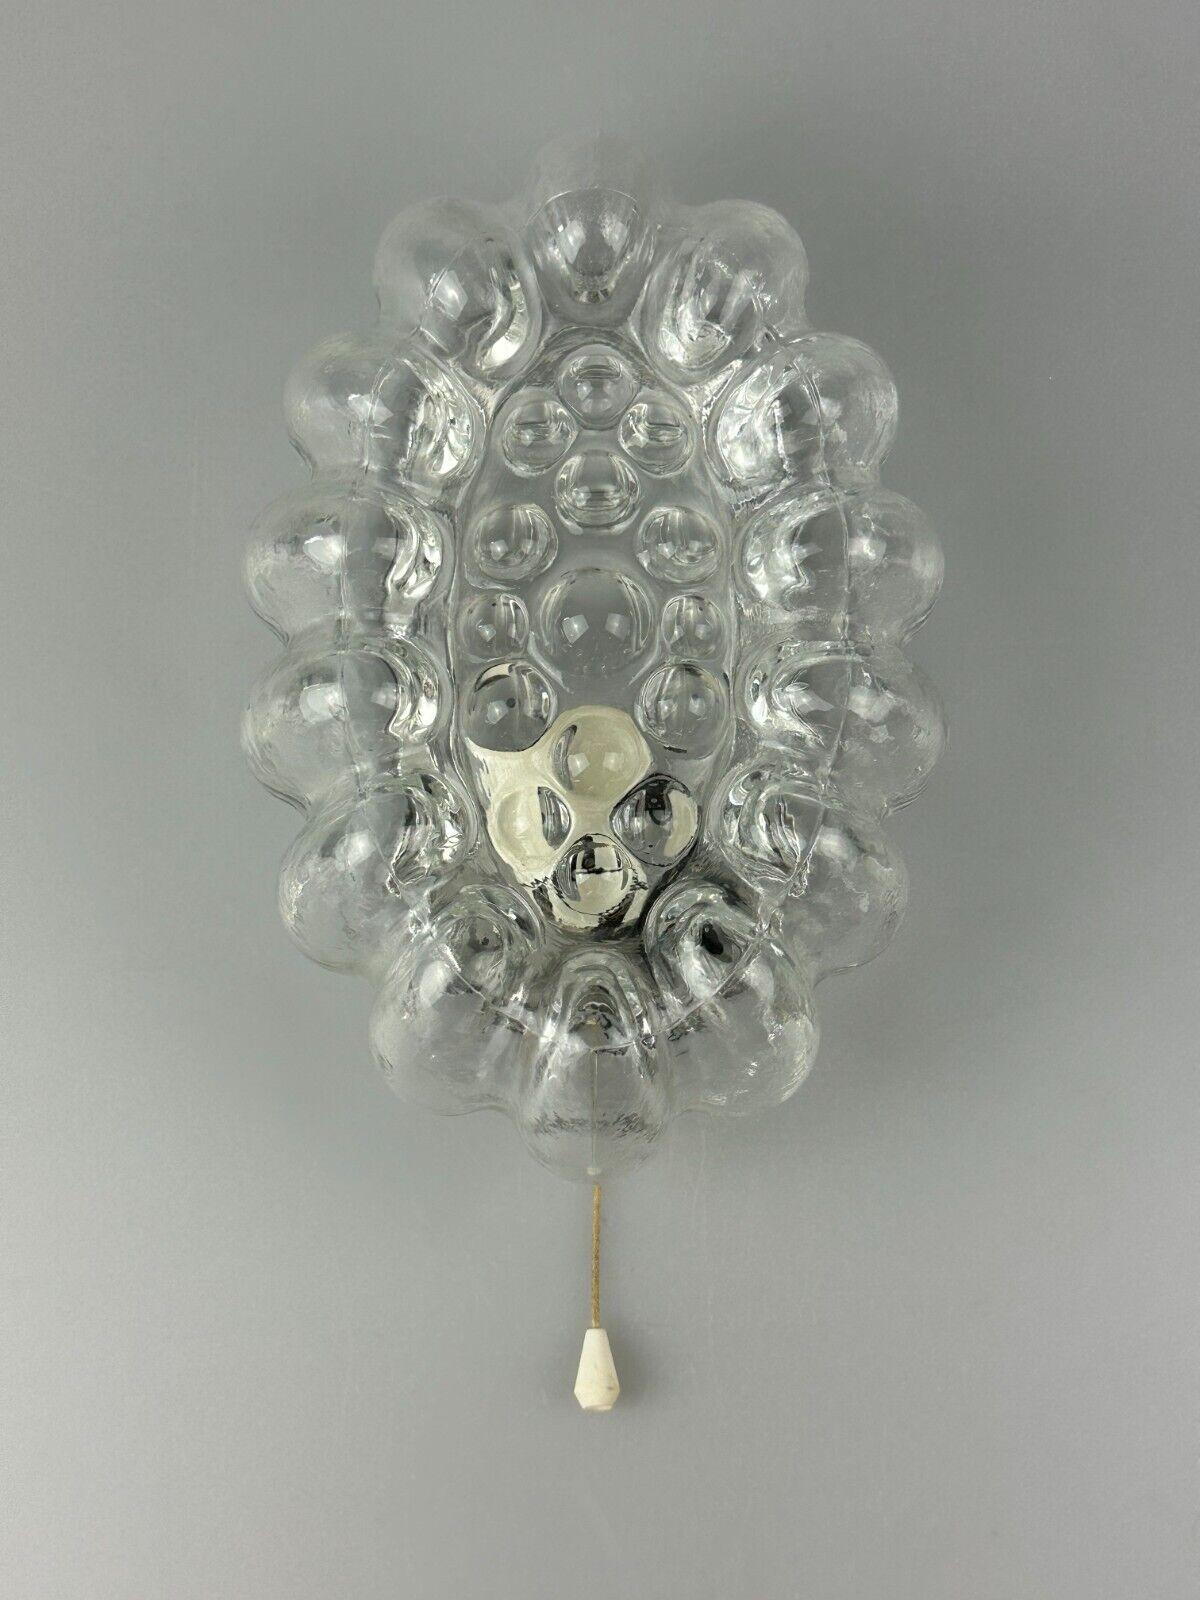 German 60s 70s wall lamp made of glass & metal bubble wall sconce space age design For Sale